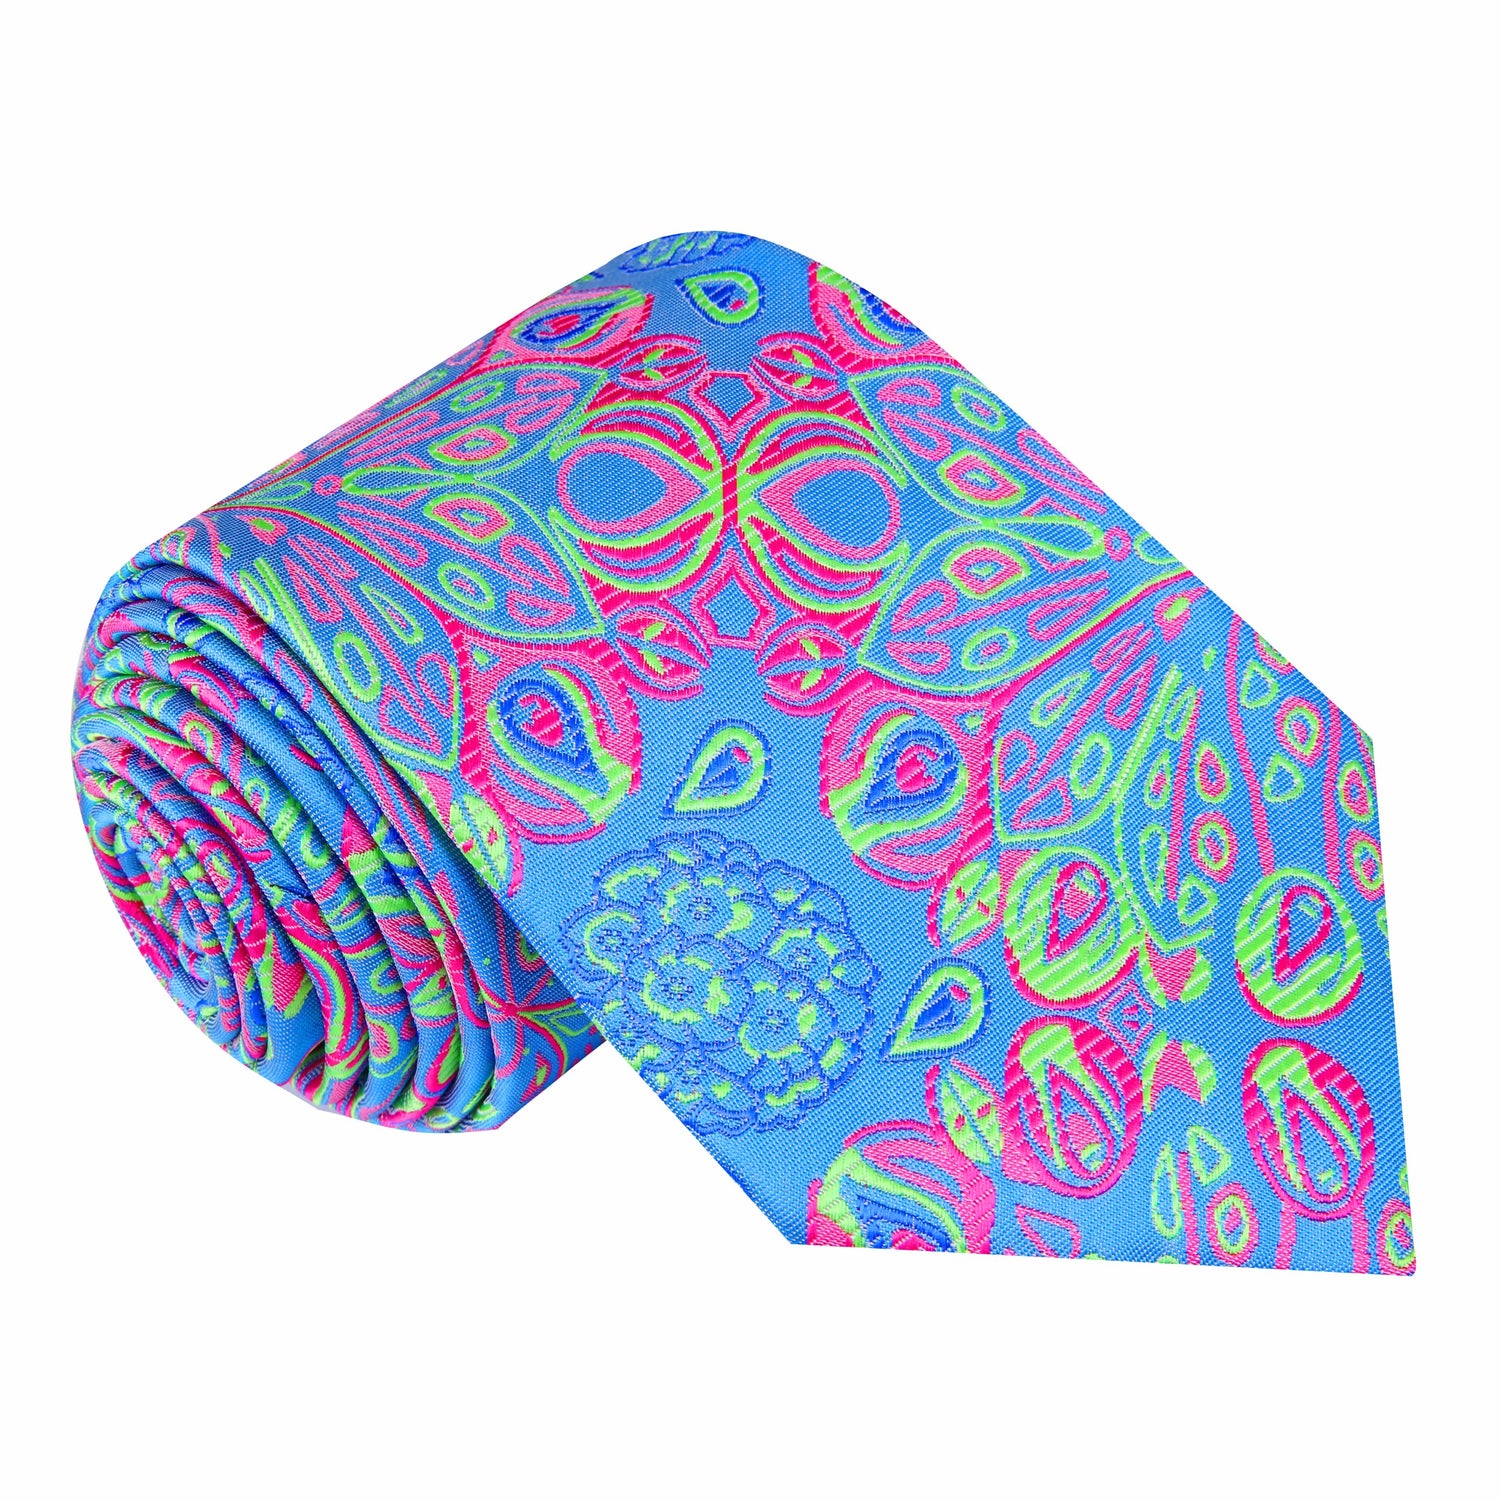 A Neon Yellow, Pink, Light Blue, Green Abstract Peacock Feather Pattern Silk Necktie 